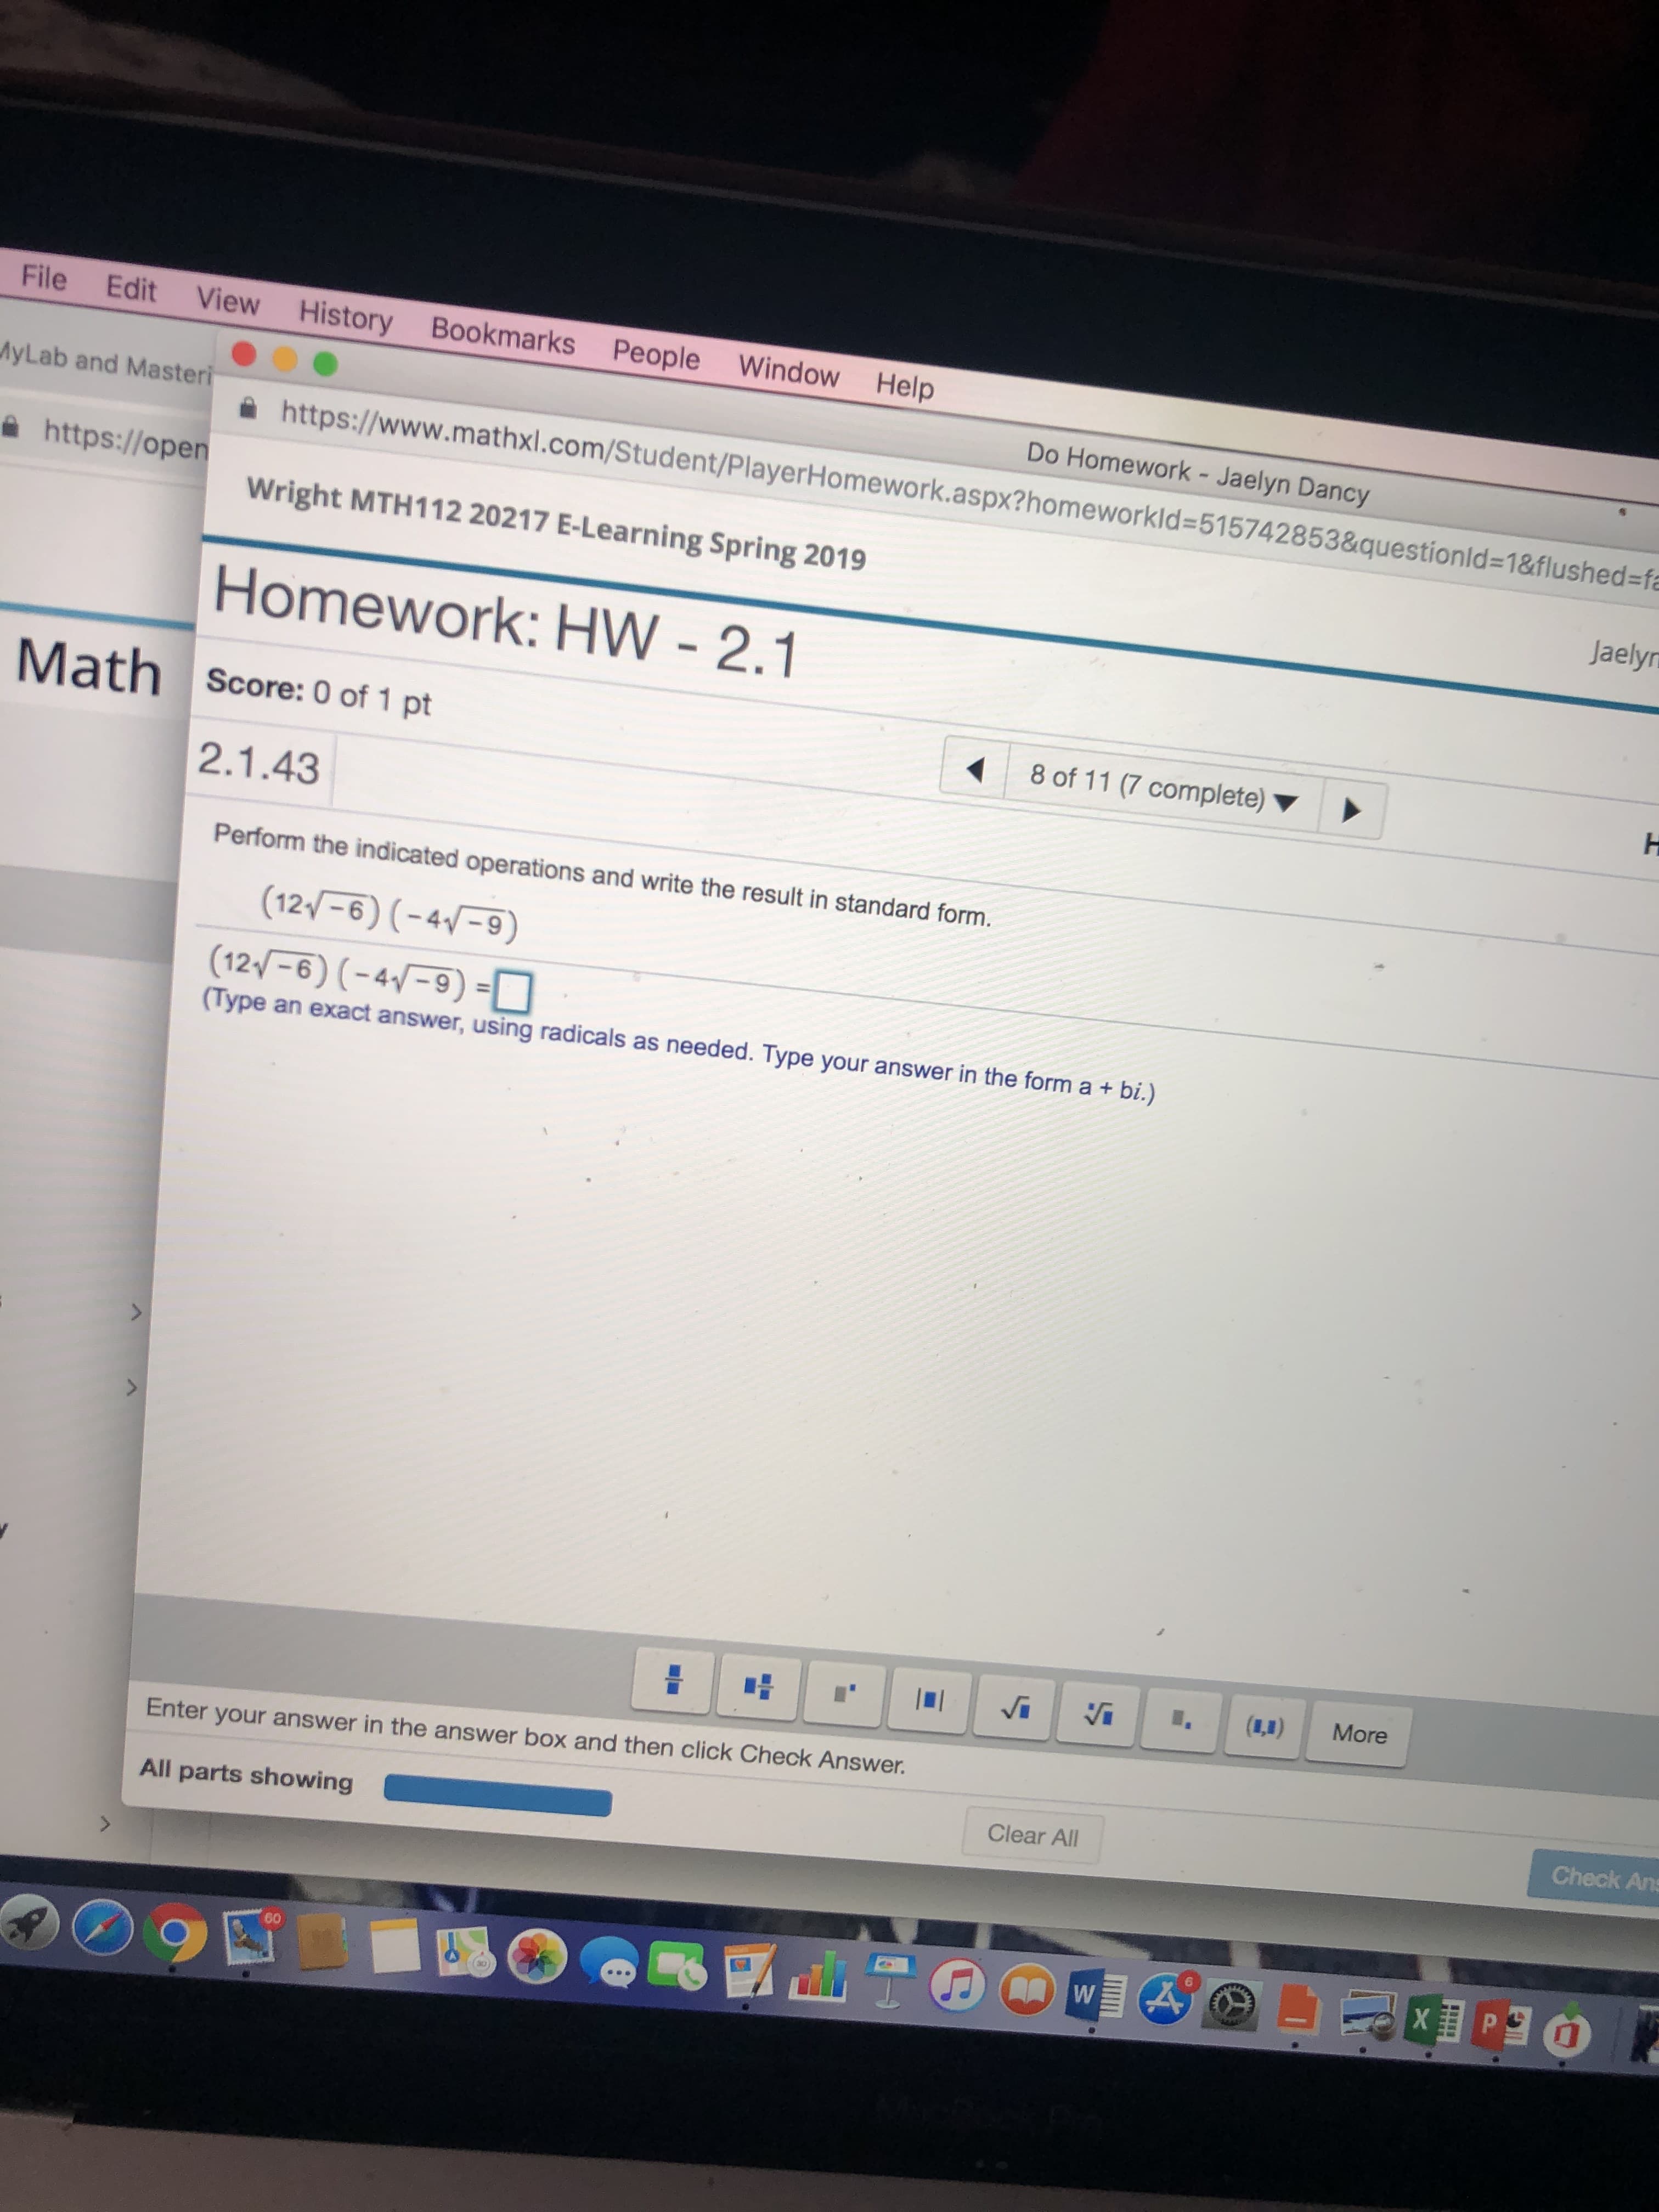 File Edit View History Book
yLab and Masteri
倫 https://ope
marks People Window Help
Do Homework - Jaelyn Dancy
https://www.mathxl.com/Student/PlayerHomework.aspx2hom
eworkld-515742853&questionld-18flushed-f
Wright MTH112 20217 E-Learning Spring 2019
Jaely
Homework: HW 2.1
Math score: 0 of 1 pt
8 of 11 (7 complete
2.1.43
Perform the indicated operations and write the result in standard form.
(Type an exact answer, using radicals as needed. Type your answer in the form a + bi.)
Enter your answer in the answer box and then click Check Answer.
Check Ans
All parts showing
Clear All
60
